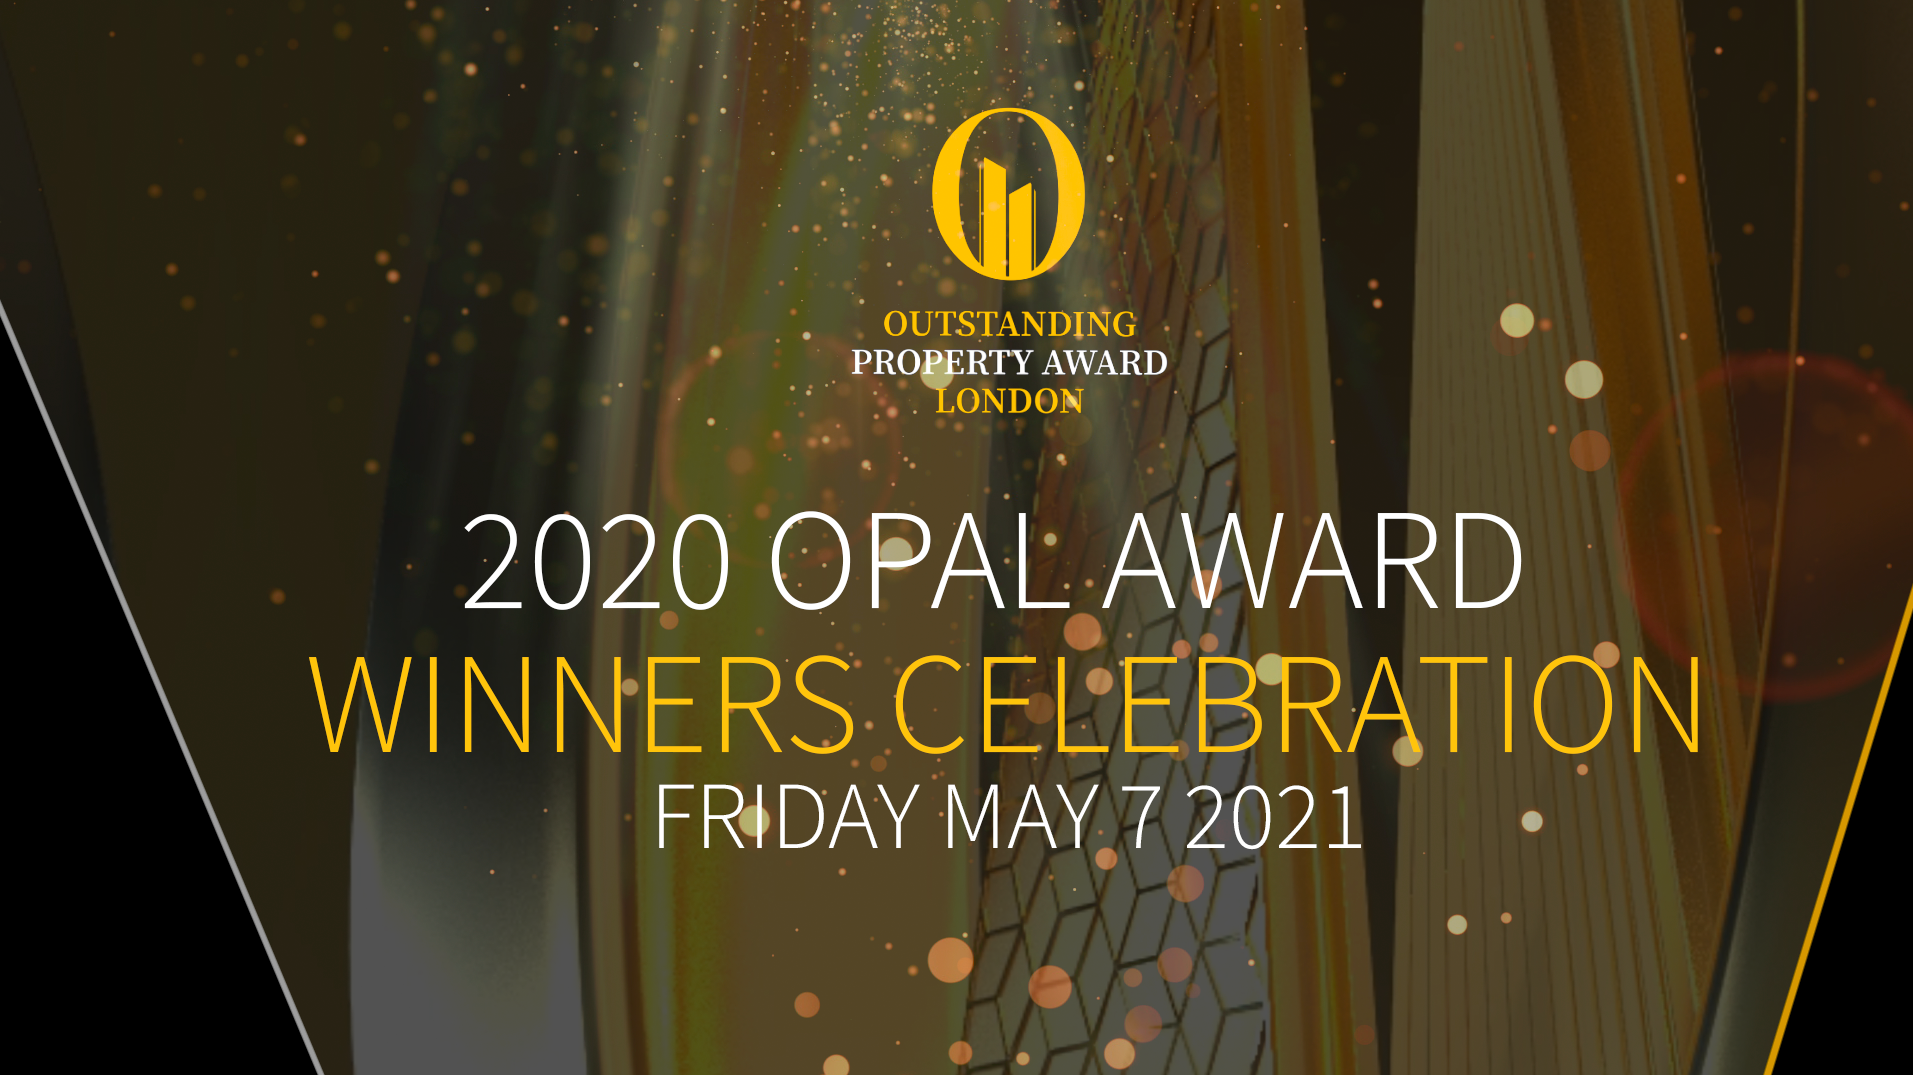 Outstanding Property Award, London™ The 2020 Outstanding Property